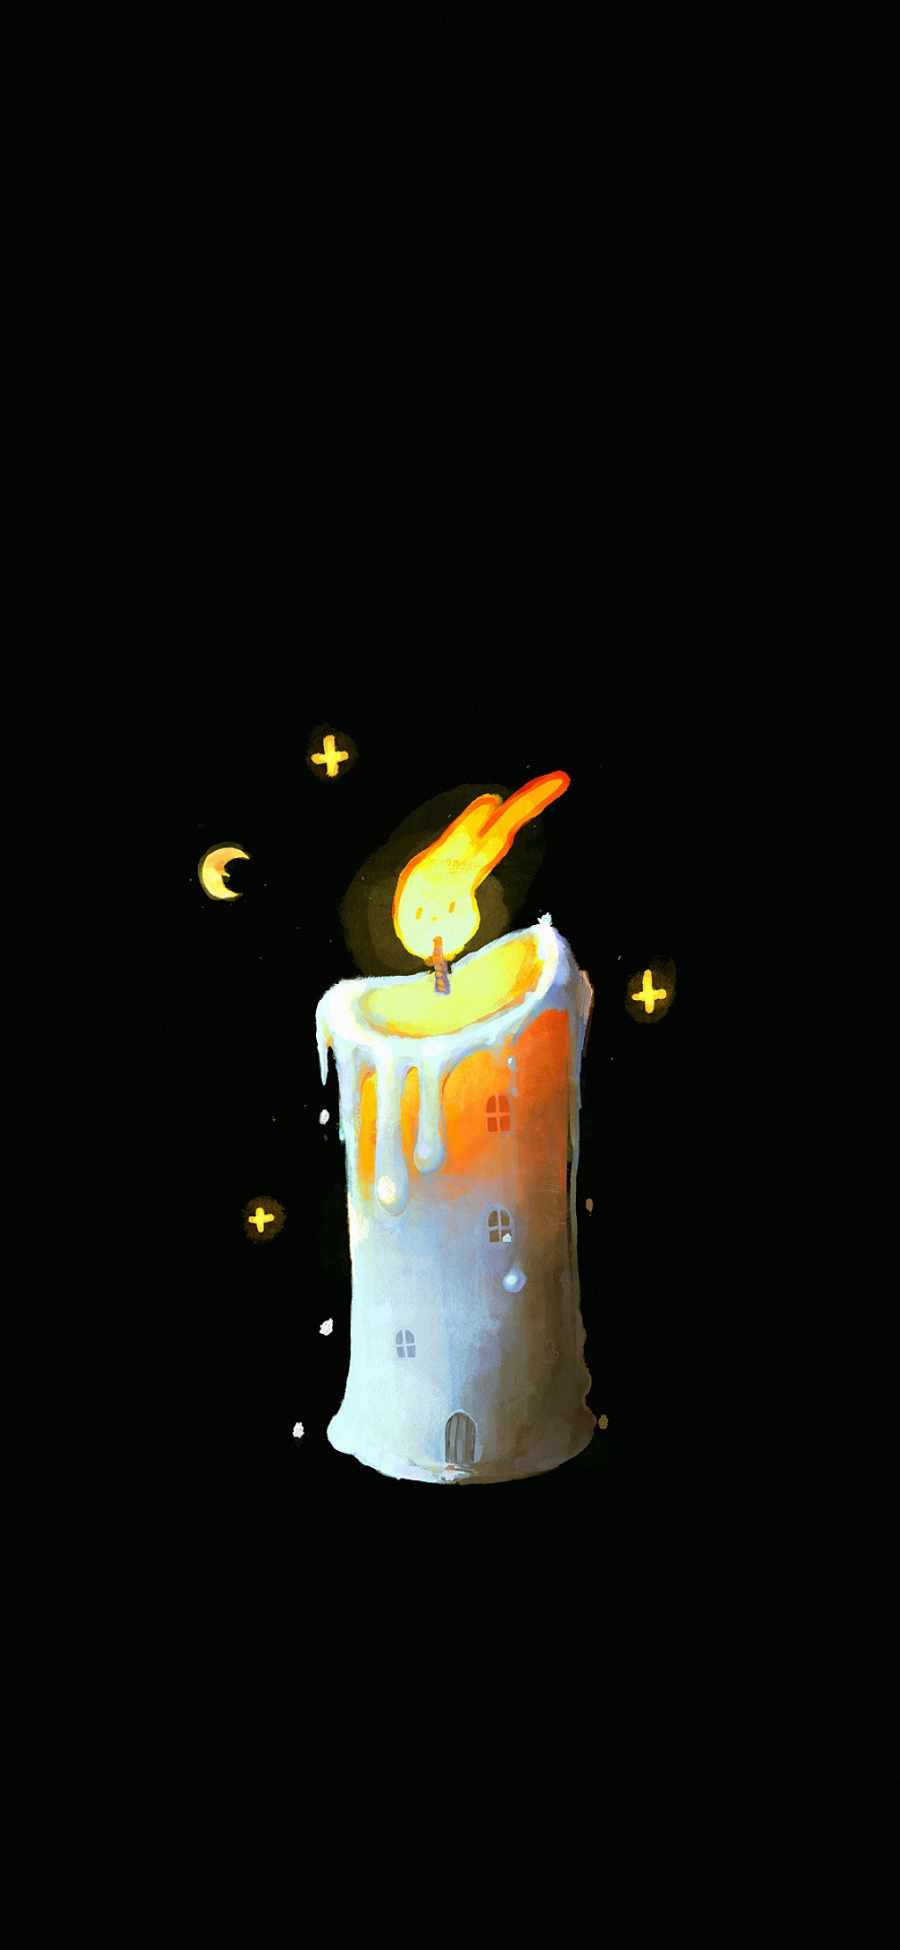 Candle wallpaper by SweetLanaz  Download on ZEDGE  6a90